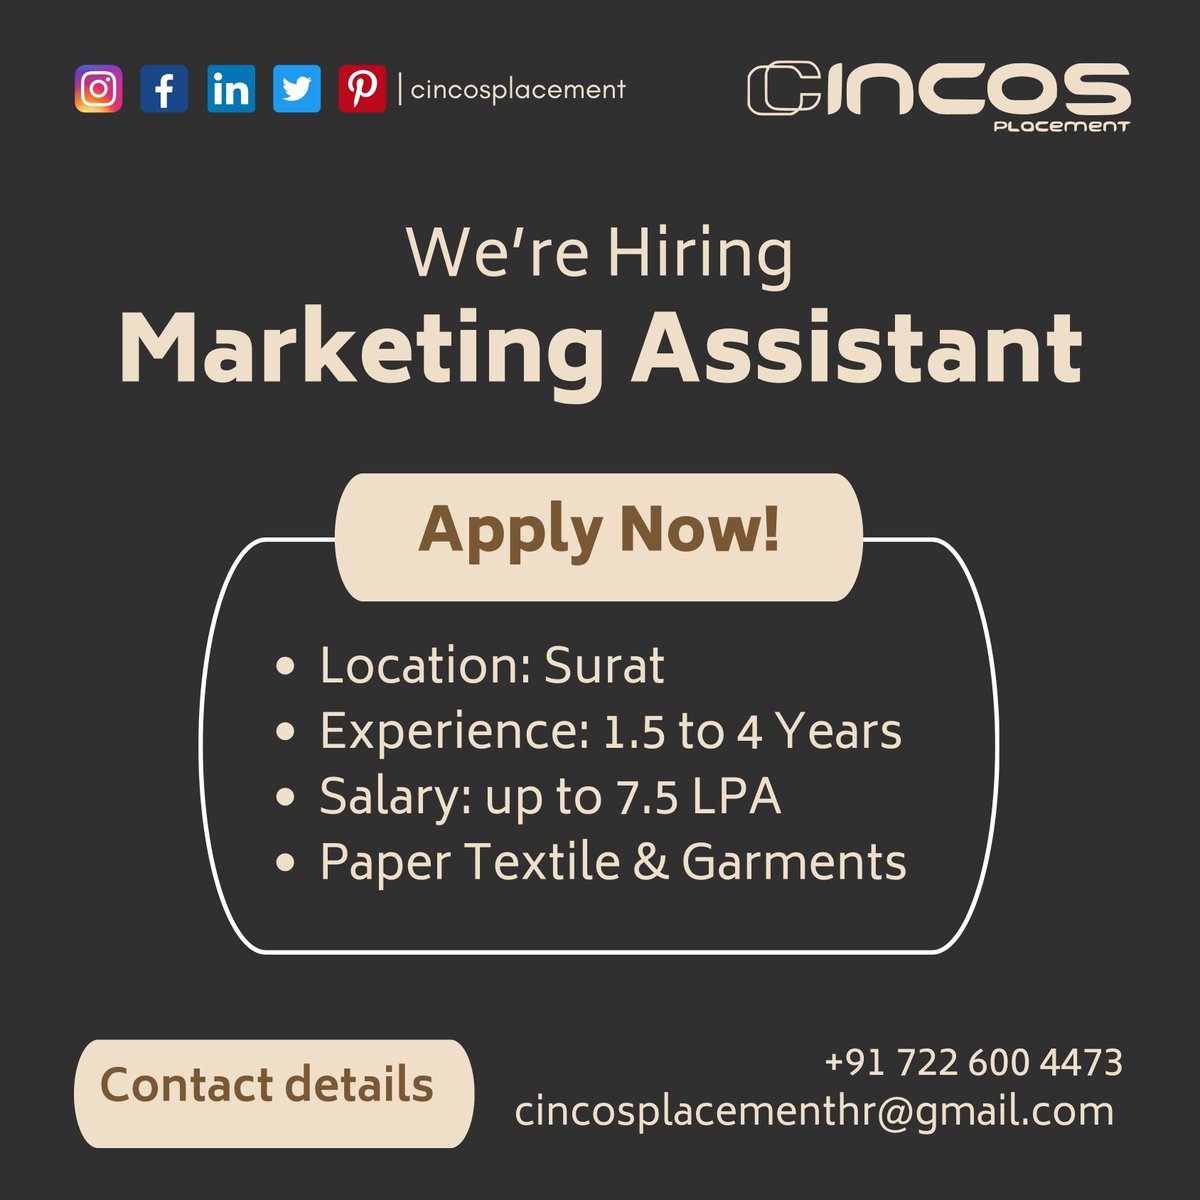 Exciting opportunity for Marketing Assistant with the best Staffing Management Consultant in Surat!

Contact Us
Phone : +91 7226004473

#MarketingAssistant #SuratJobs #DreamCareer #UrgentJobs #BestRecruitmentConsultancyInSurat #BestRecruitmentAgencyInSurat